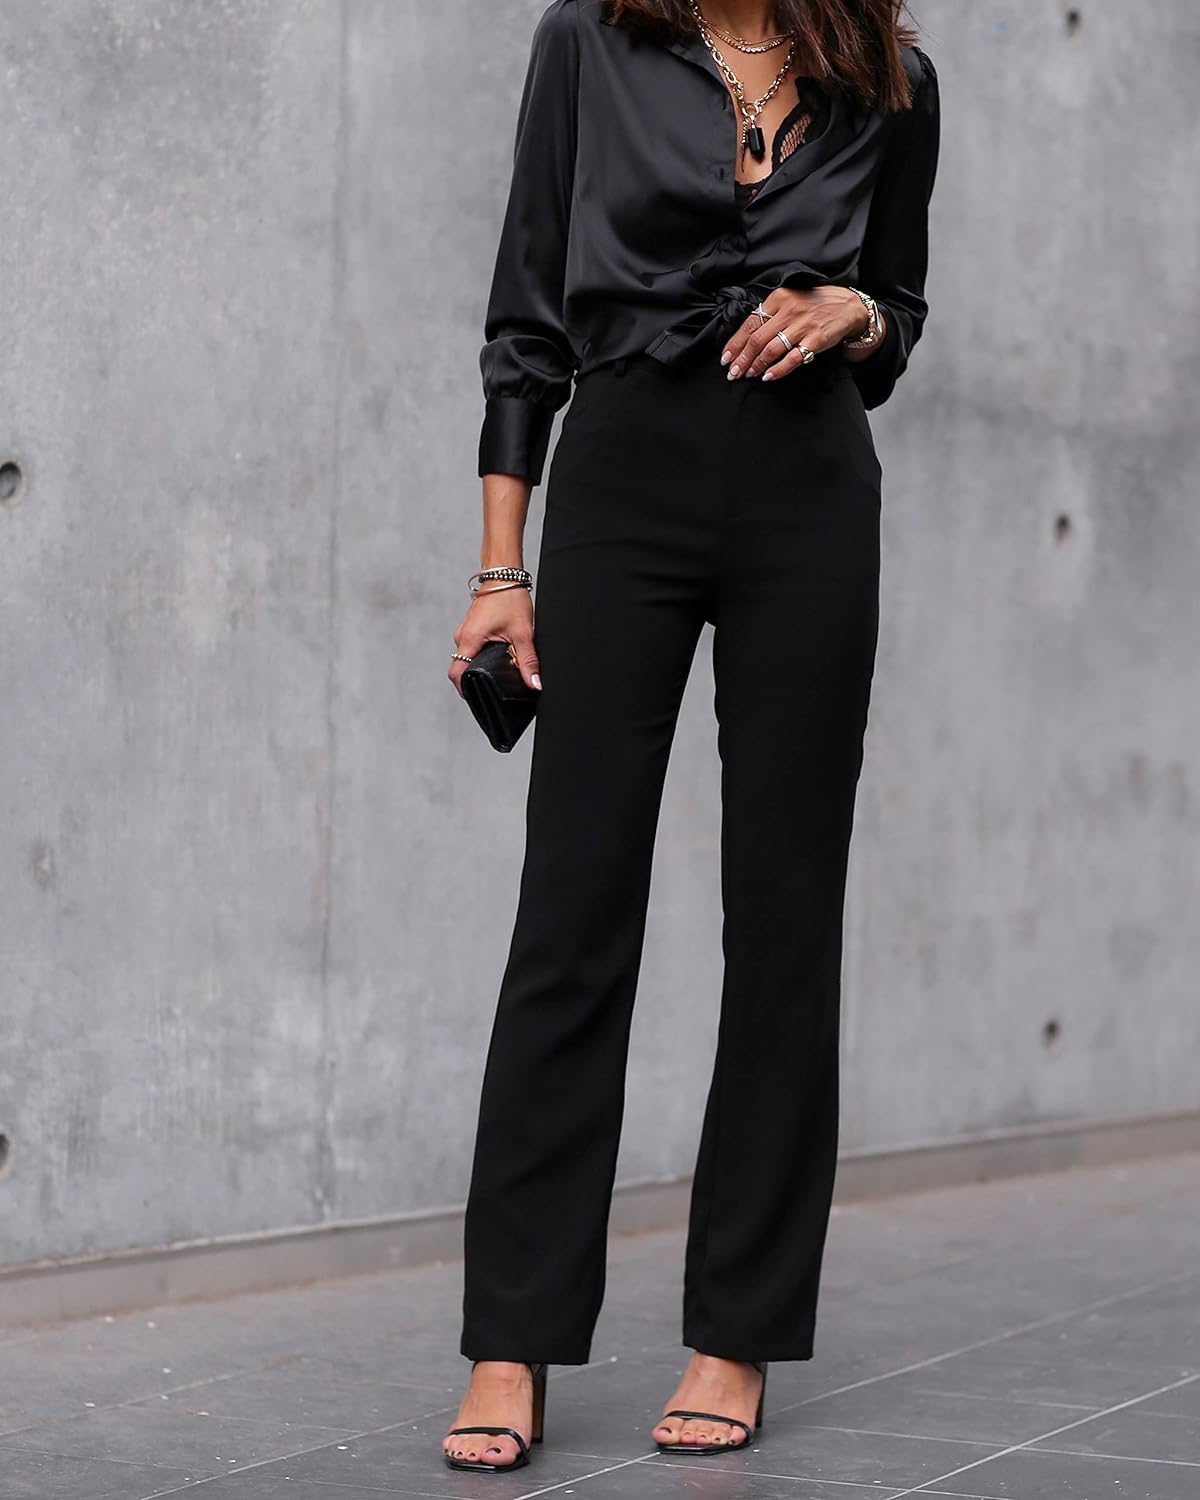 The Drop Women' Standard Black High Waist Tailor Pant by @Lucyswhims